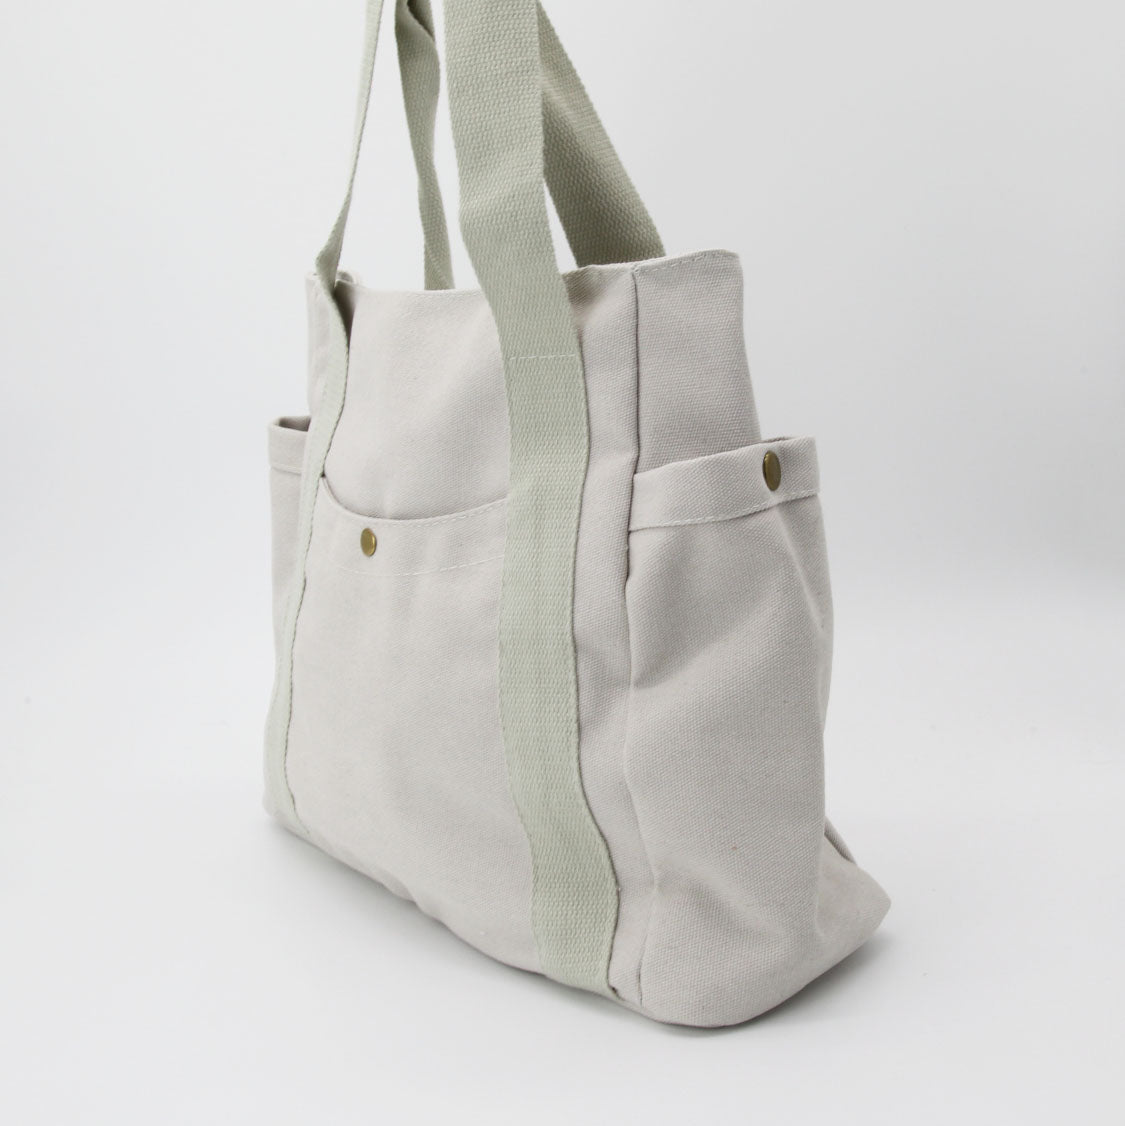 Large Canvas Tote Bag With Pockets & Zipper in Beige – Harlow & Lloyd